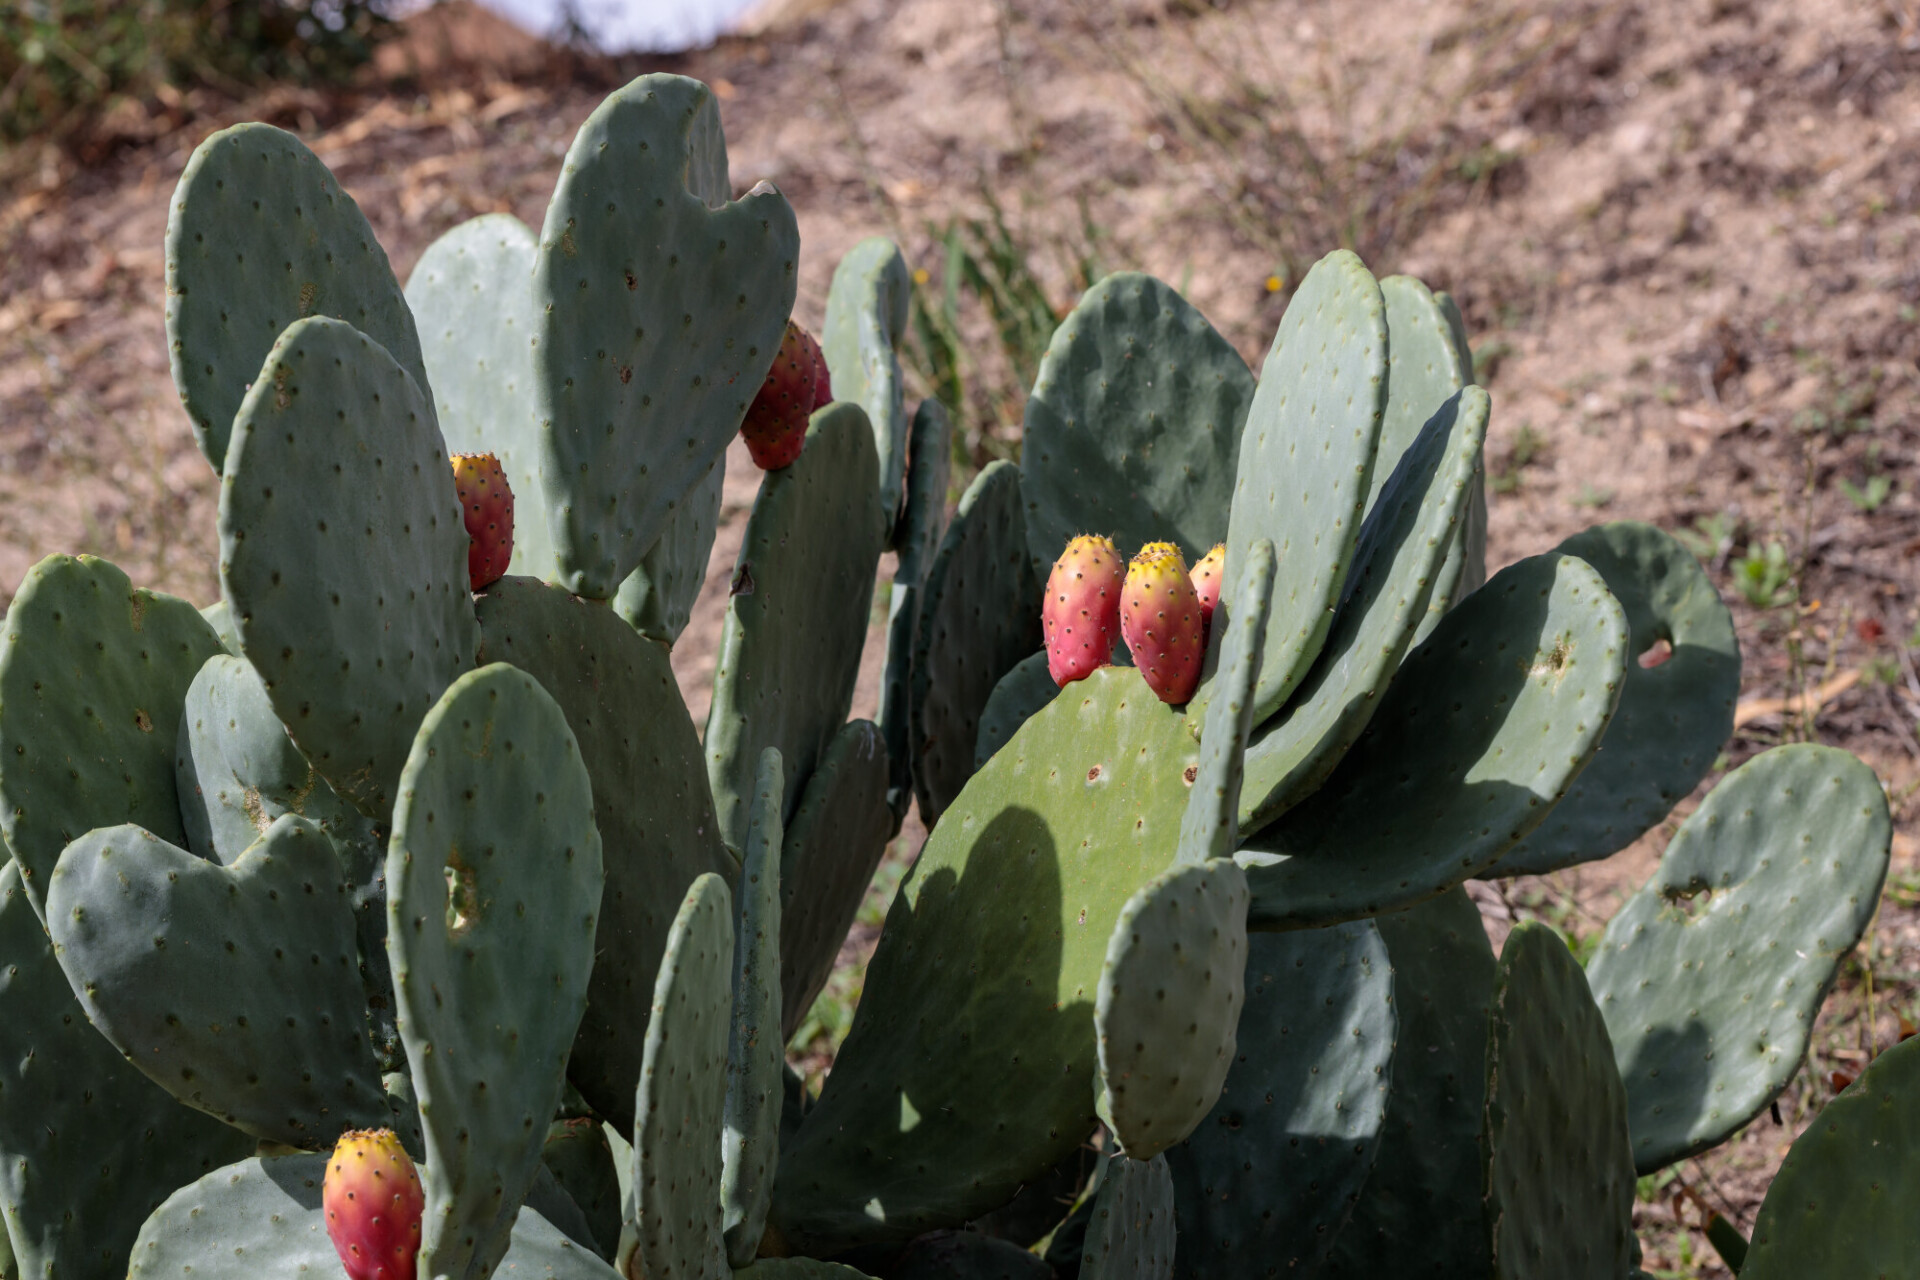 Prickly pear cactus with fruit in red color, cactus spines.